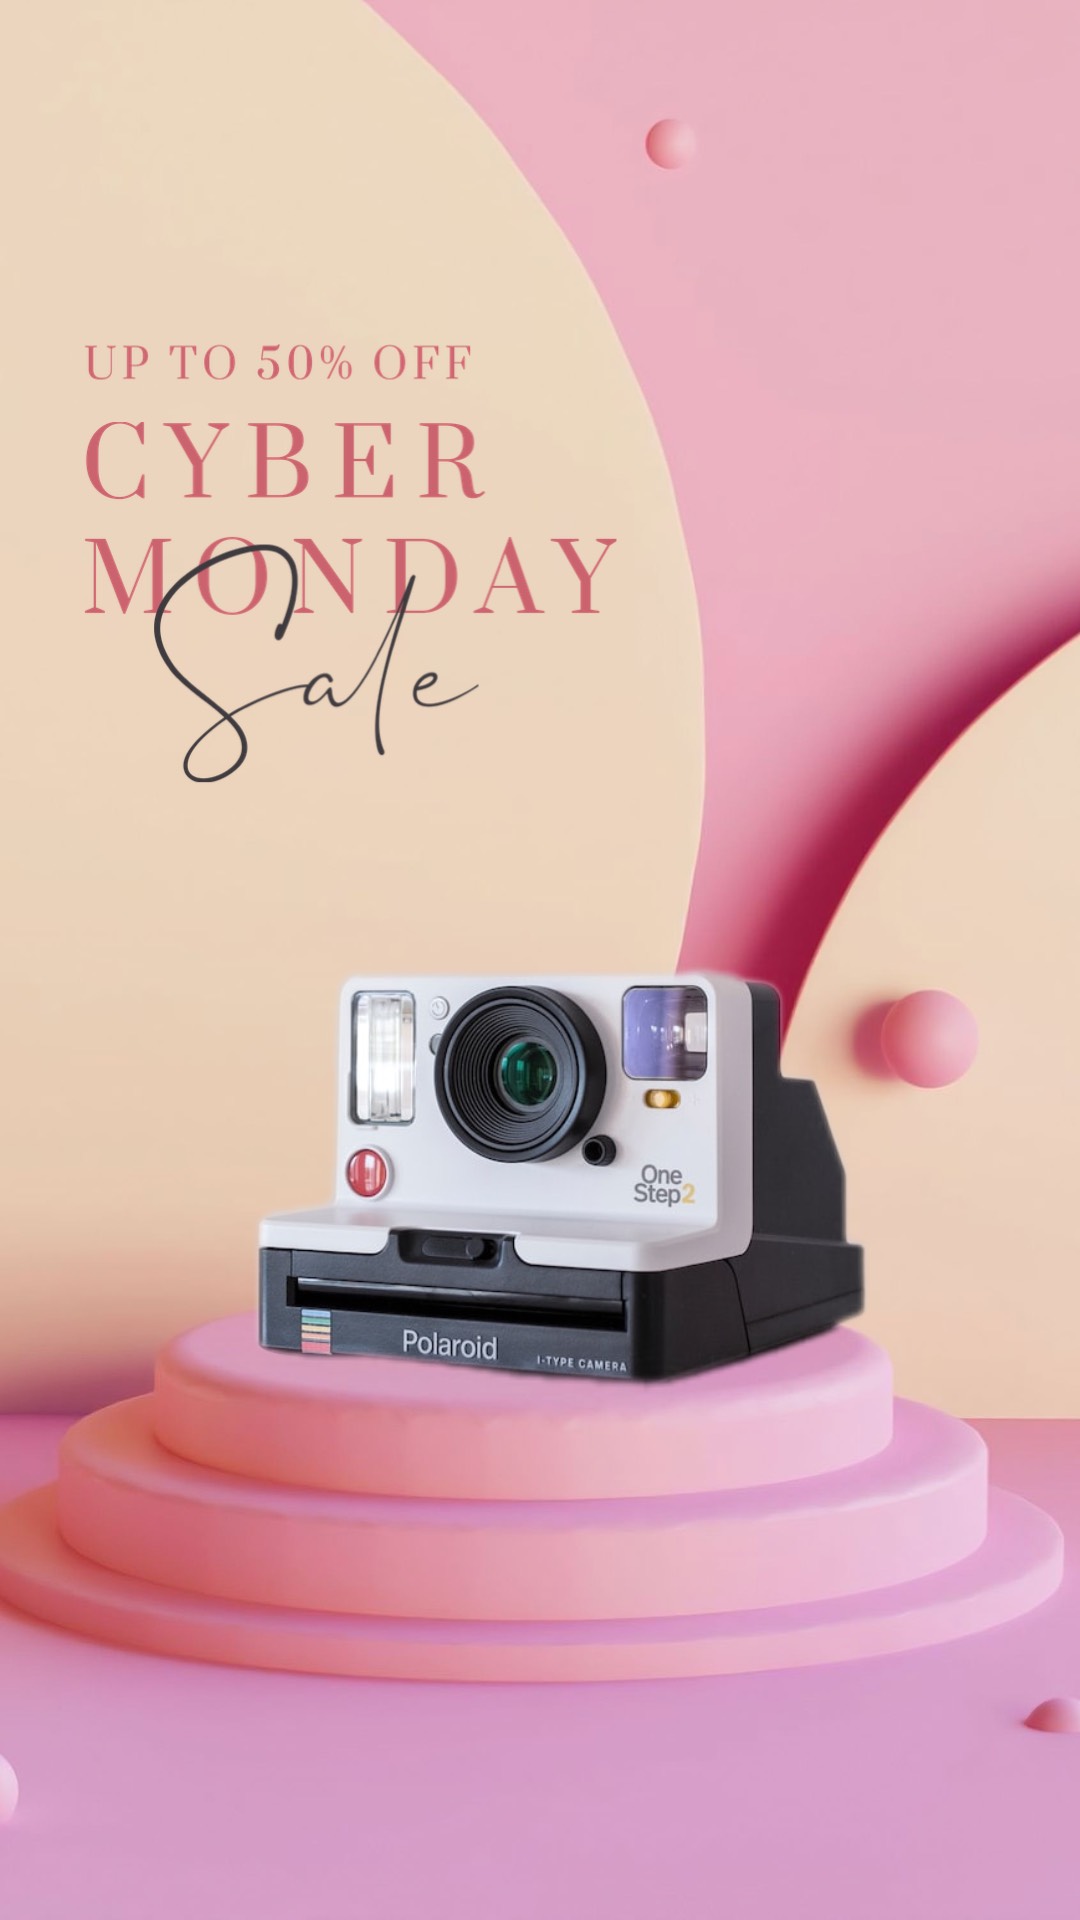 Cyber monday product sale pastel pink Instagram story template 